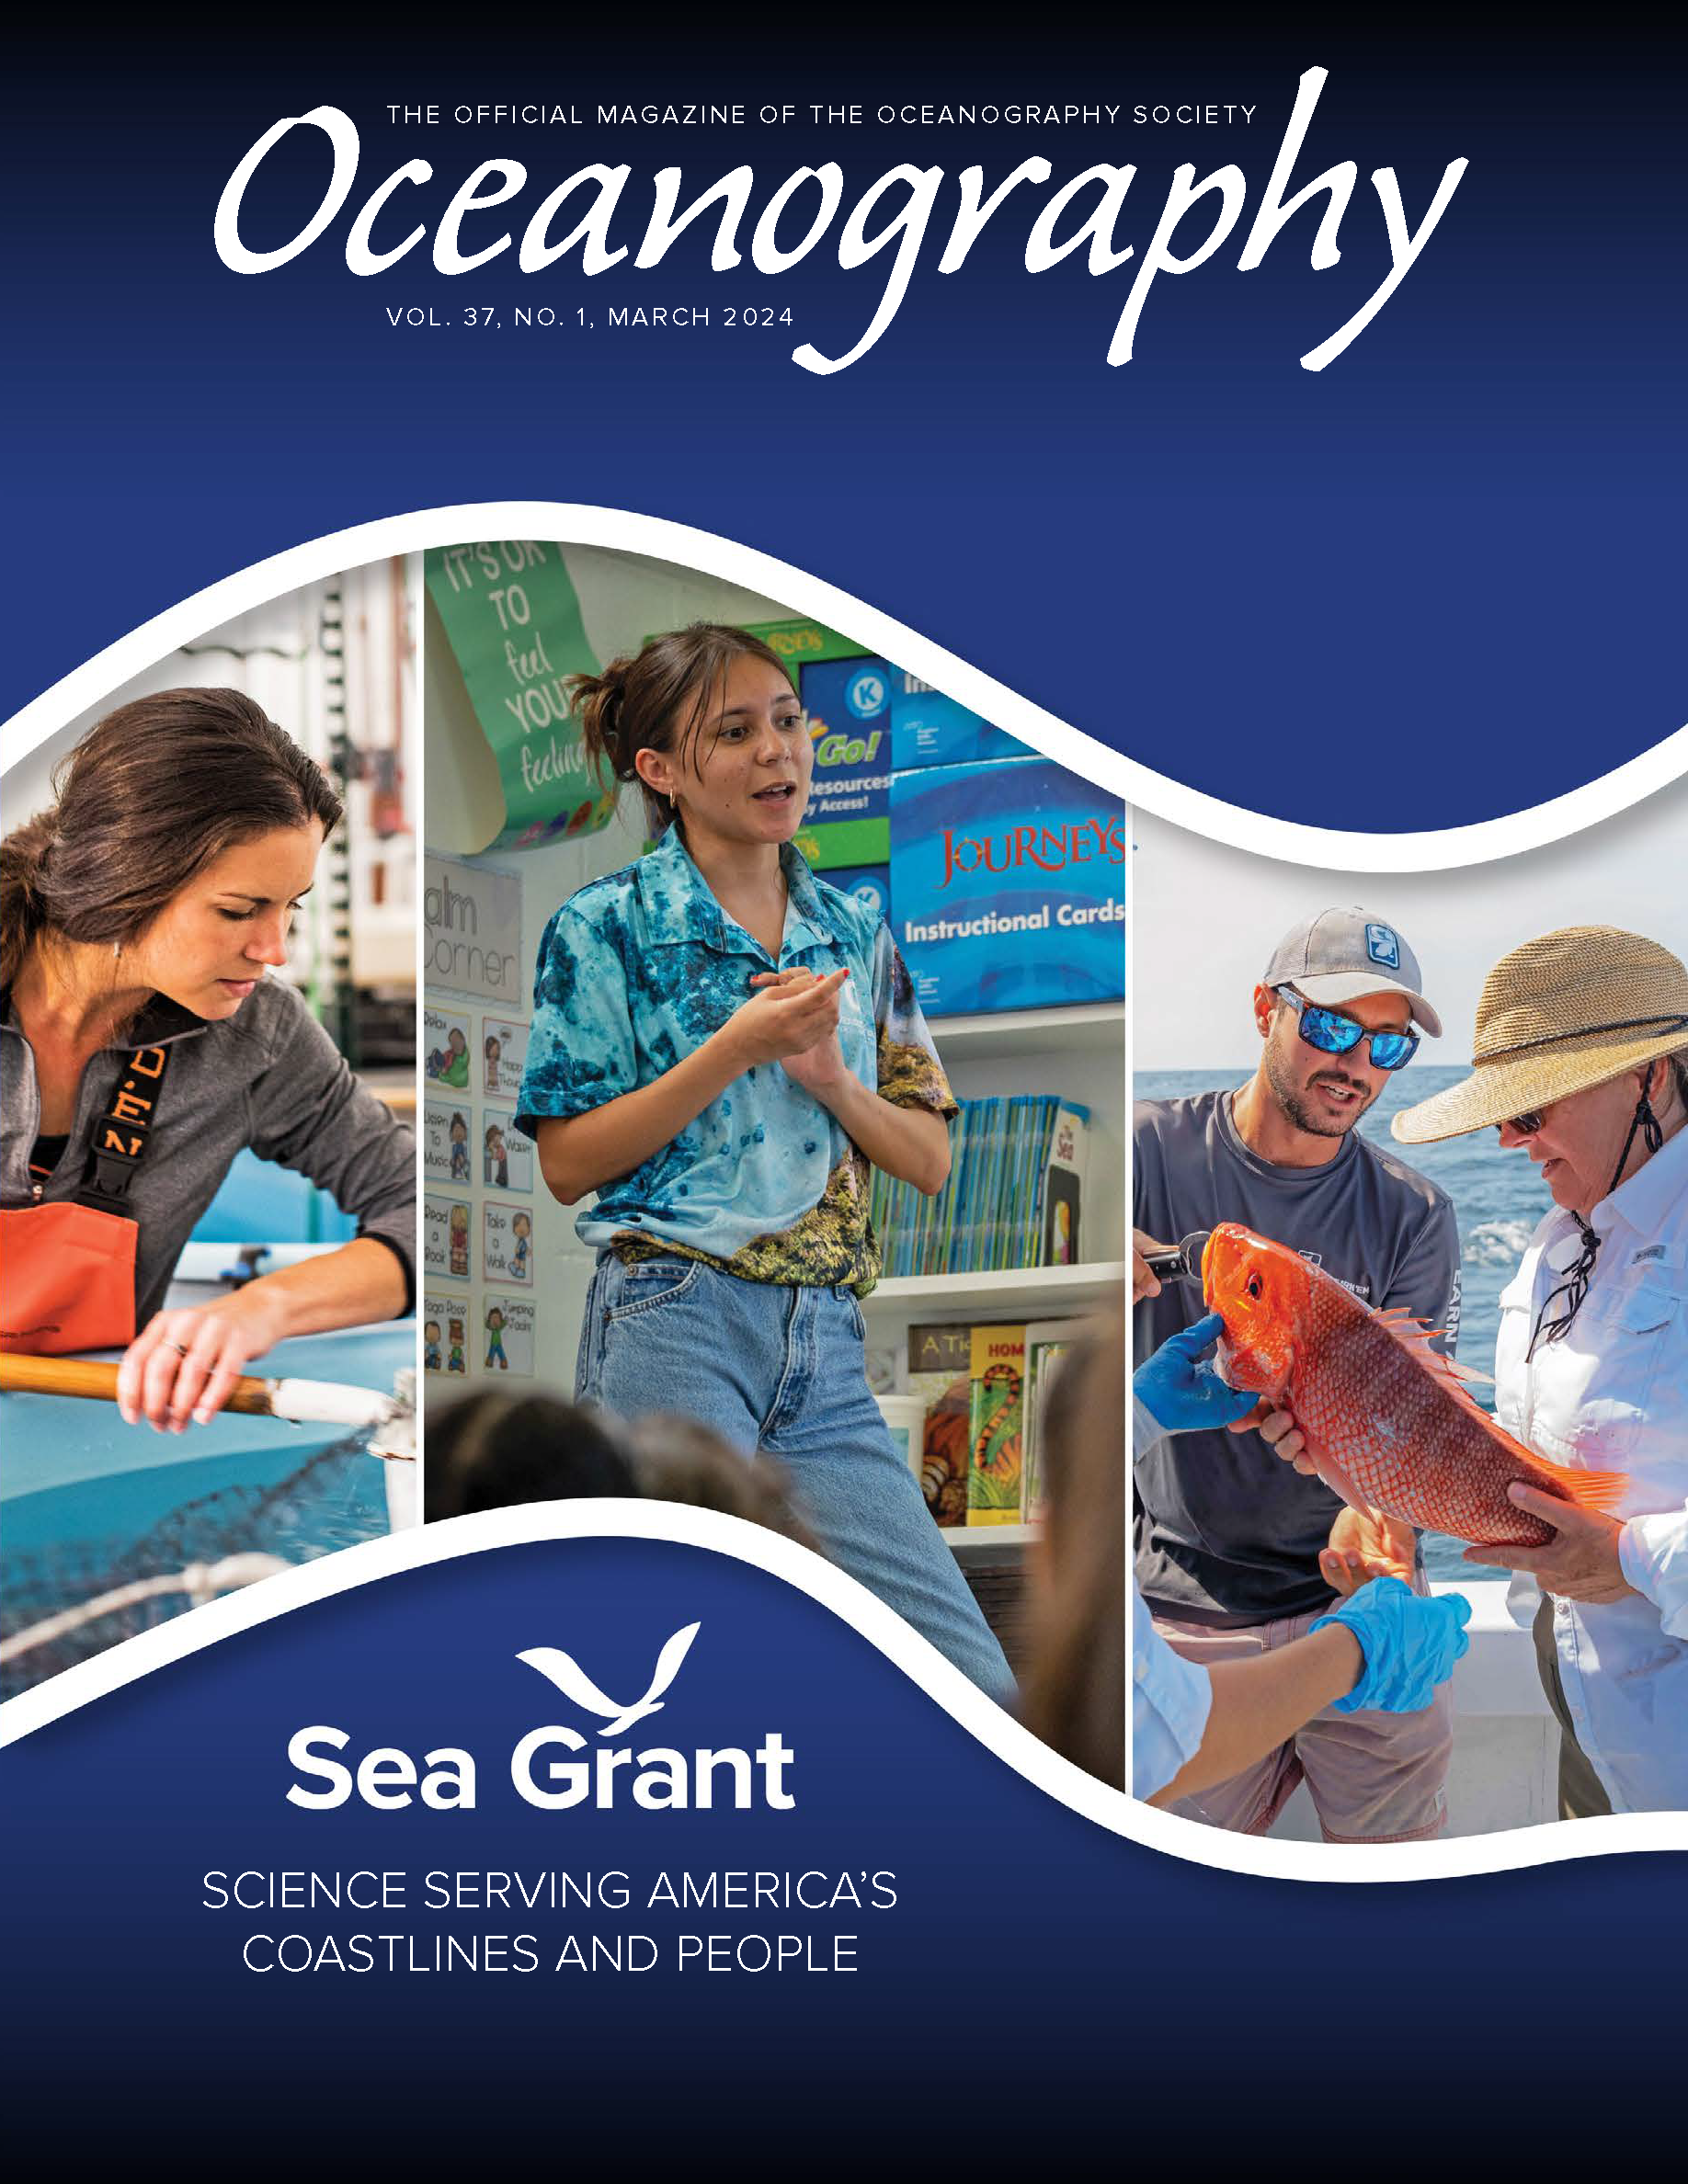 Images of Sea Grant's work in research, education and extension provided by (from left to right) Wisconsin, Guam and Florida Sea Grant programs. Design by Hallee Meltzer | National Sea Grant Office.